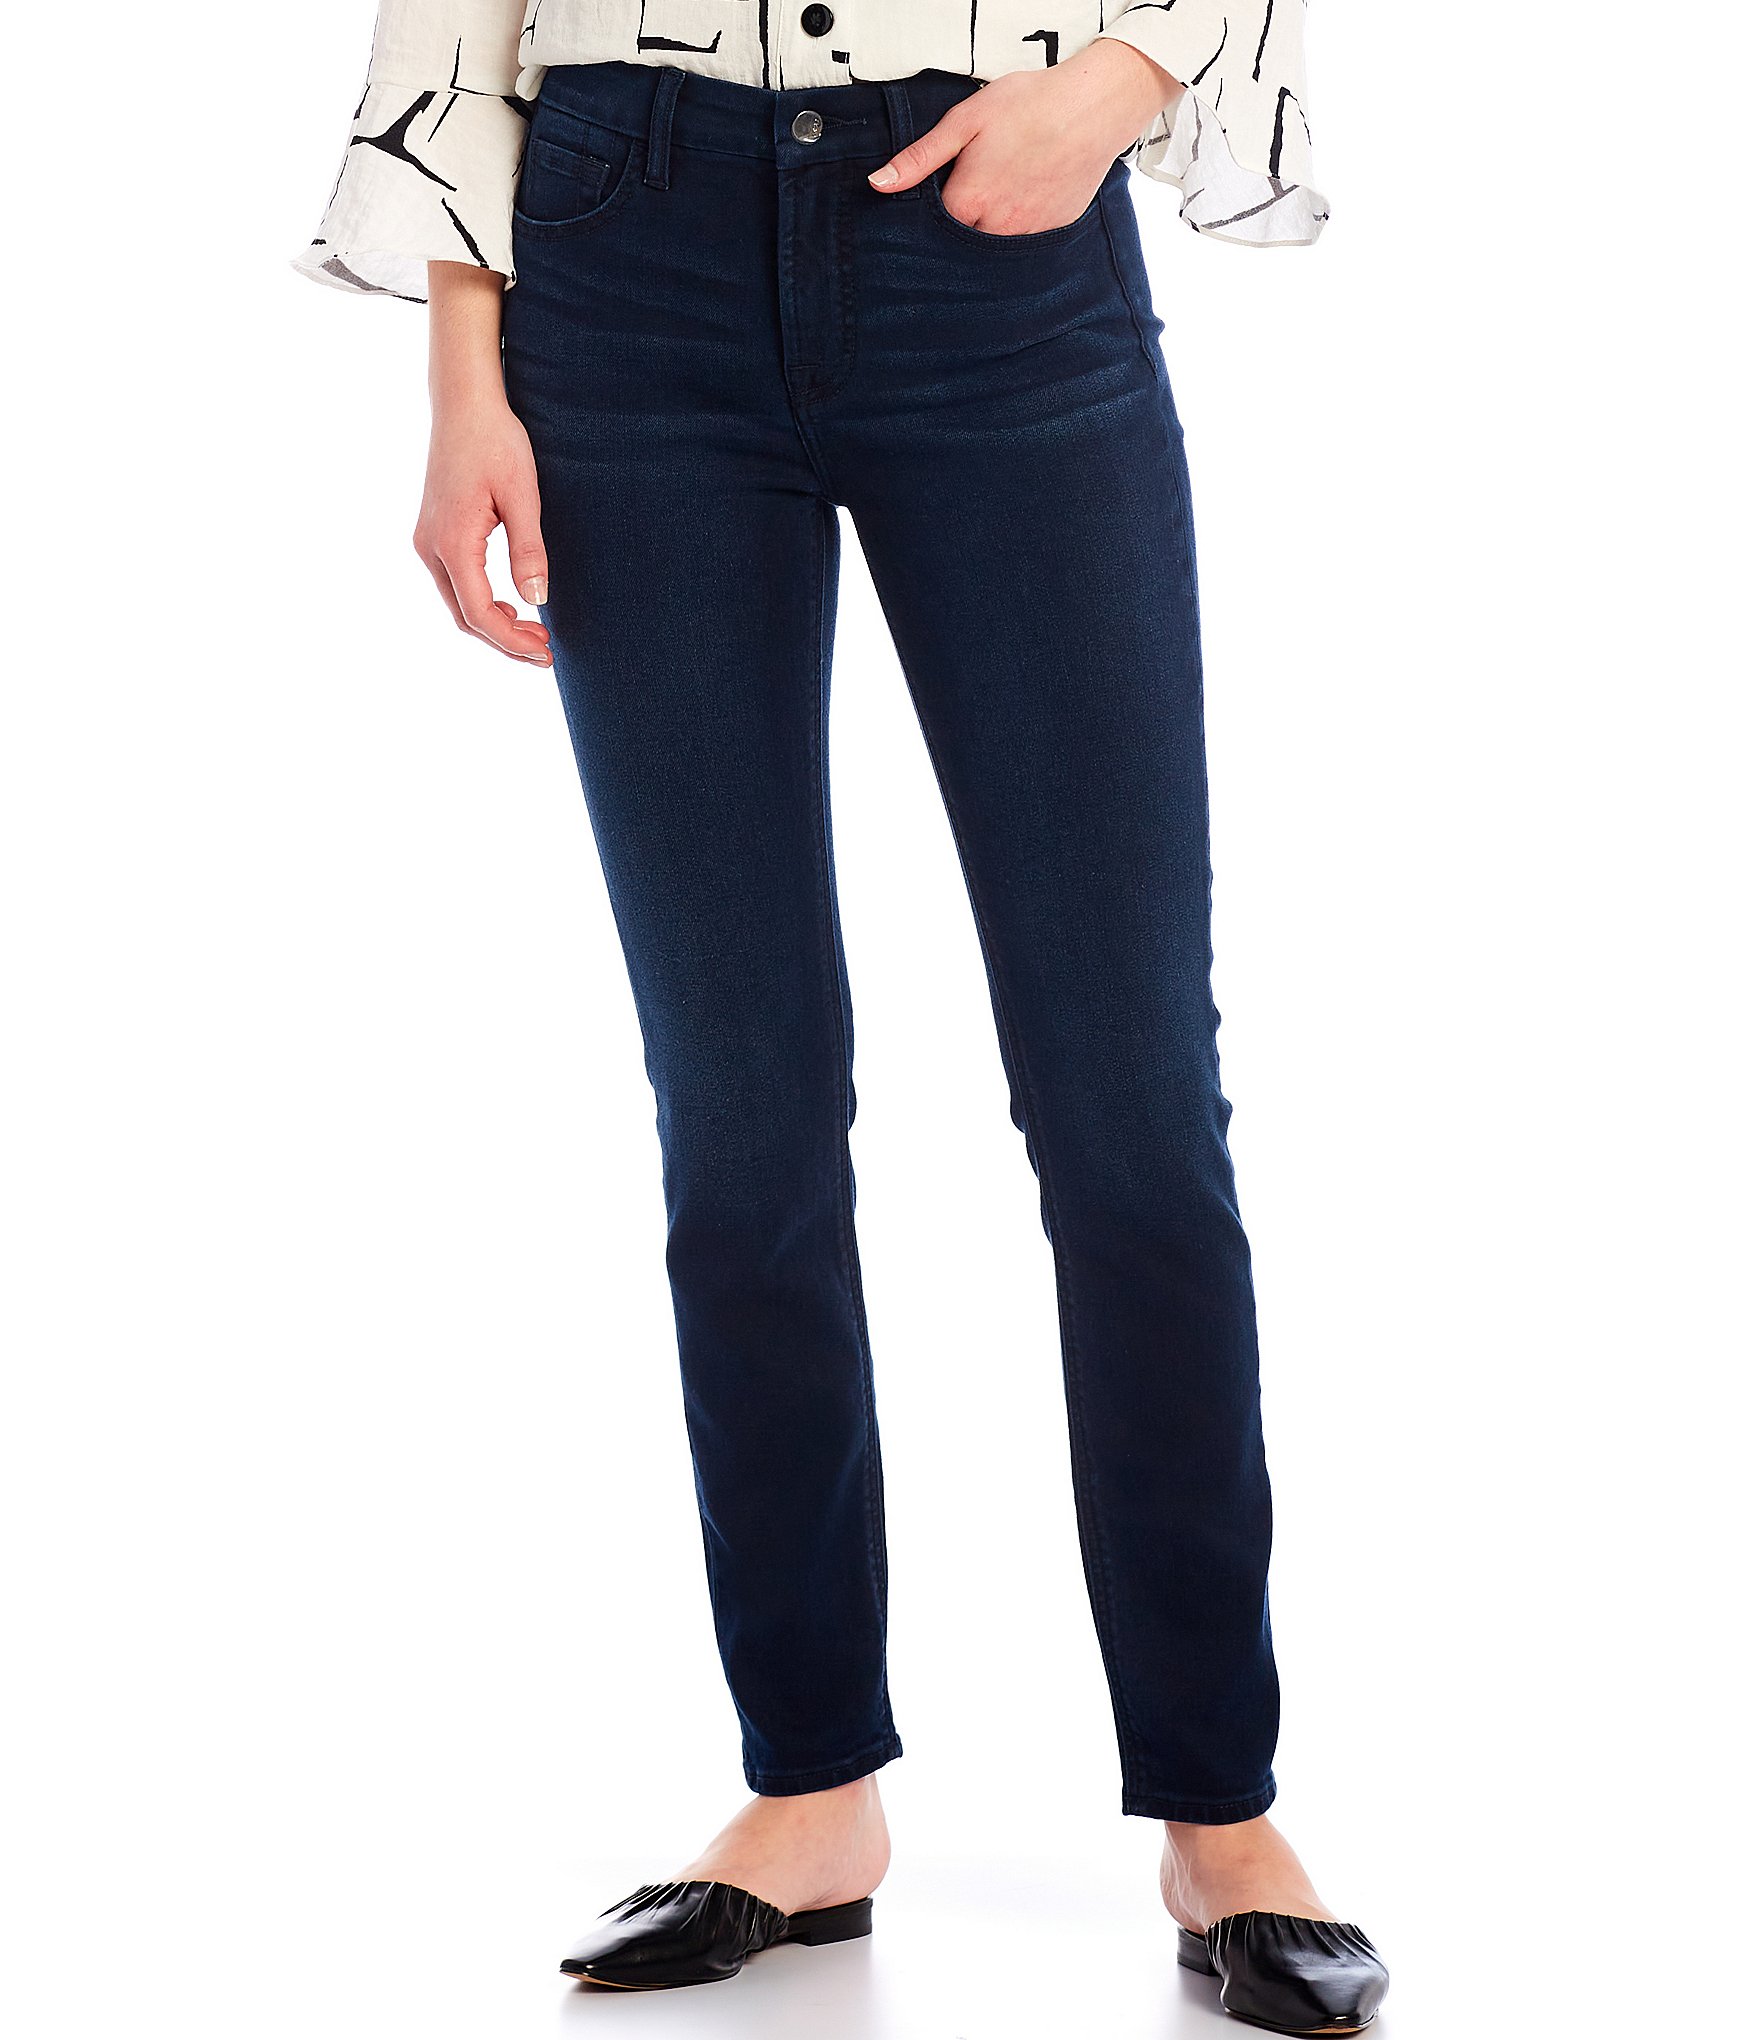 JEN7 by 7 for All Mankind Stretch Skinny Jeans